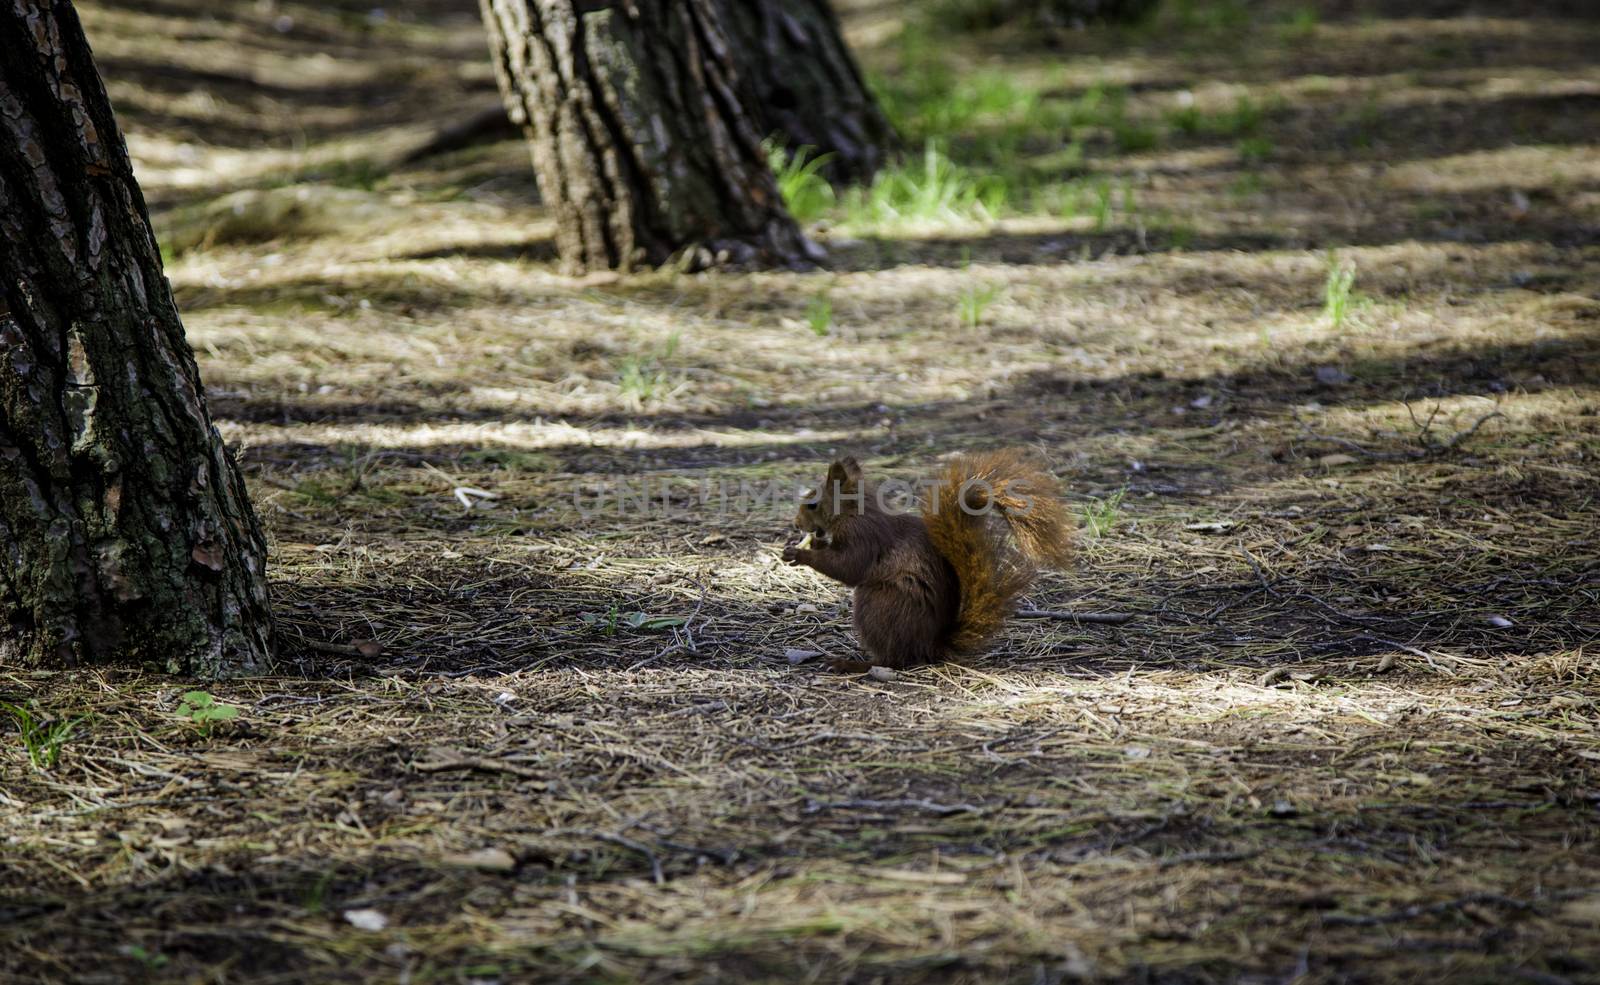 Squirrel in the forest, detail of wild animal in freedom, nature